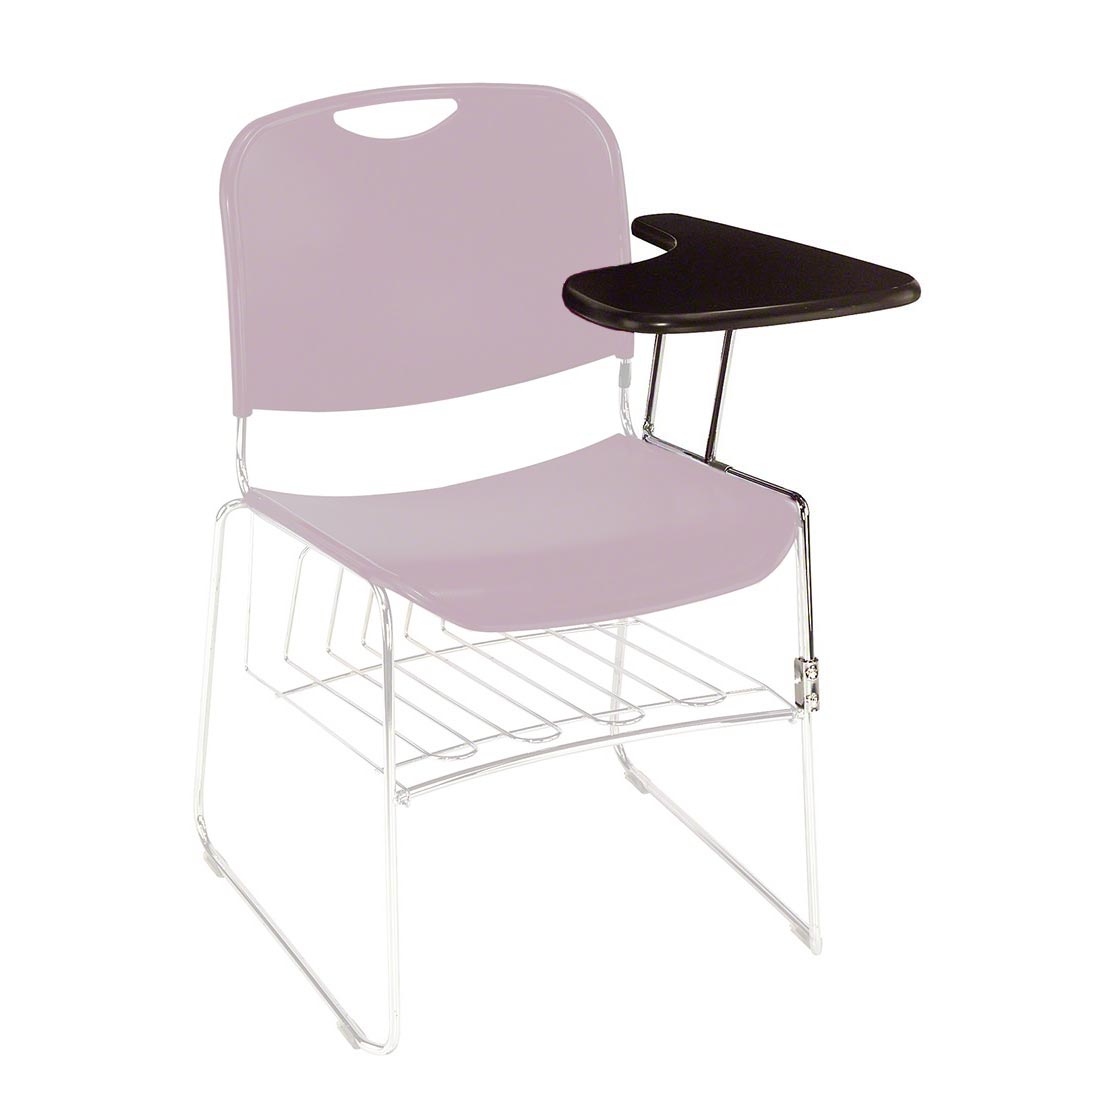 MODEL MT-1006 Plastic Injection moulded shell Back and Seat